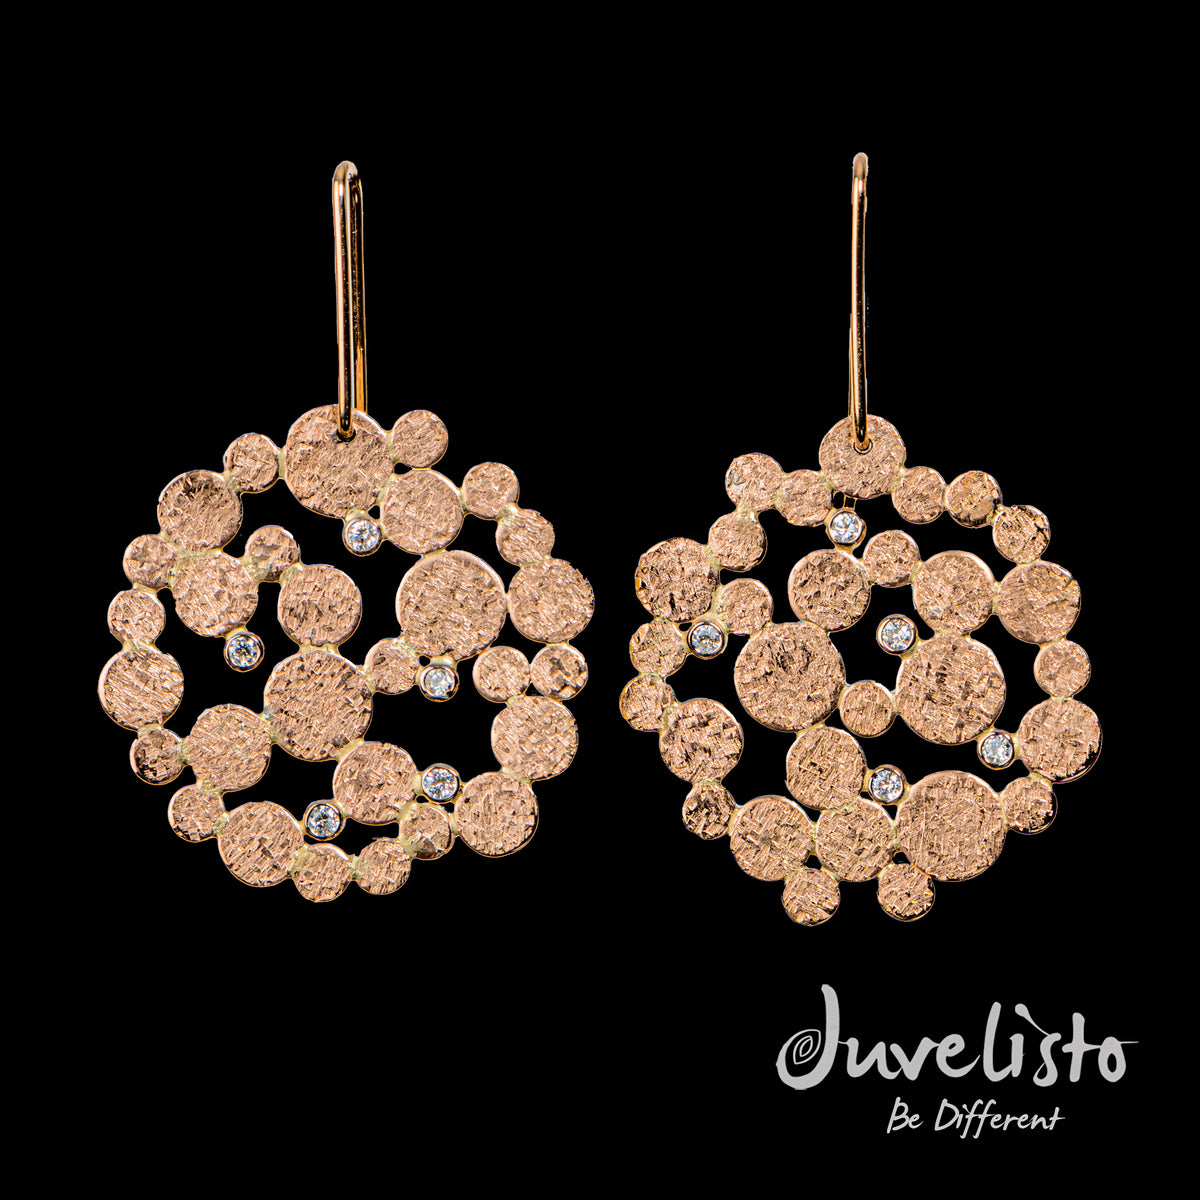 Juvelisto 14K Gold Disk Earrings with Diamonds